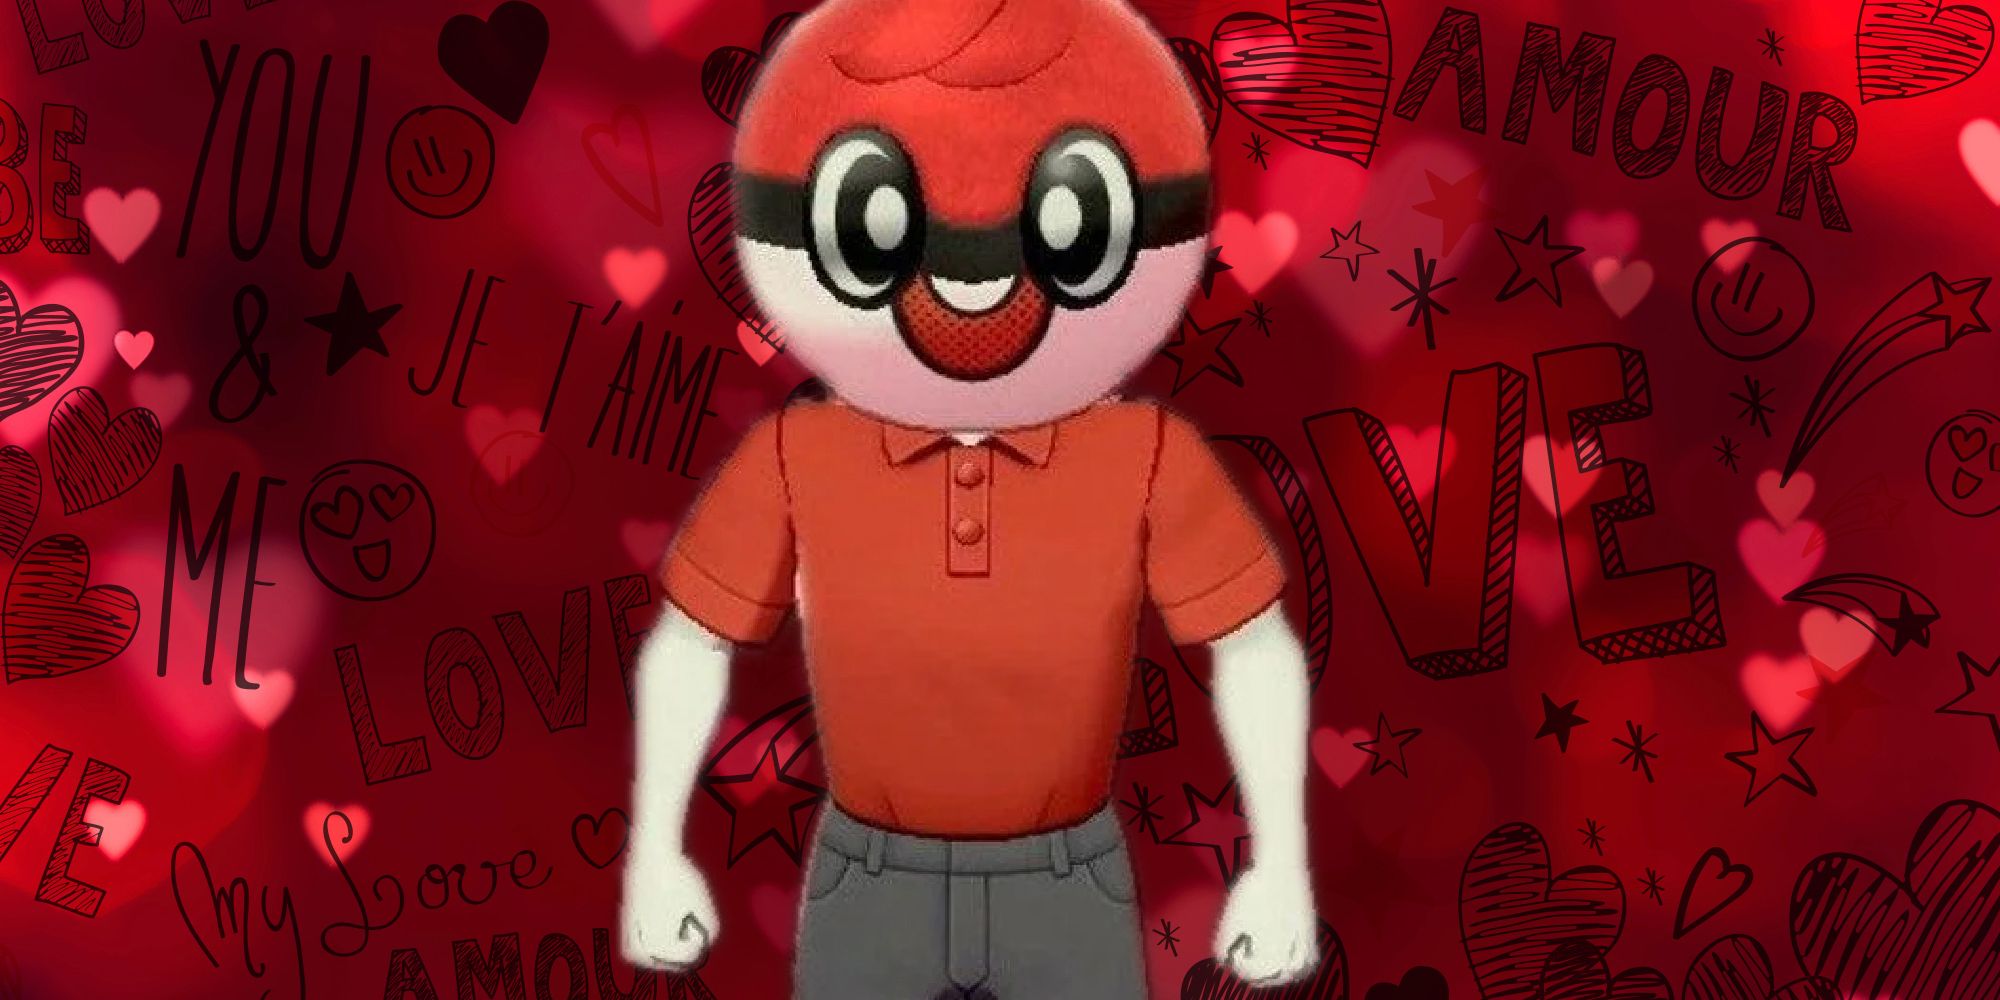 ball guy from pokemon surrounded by lovehearts and the word love